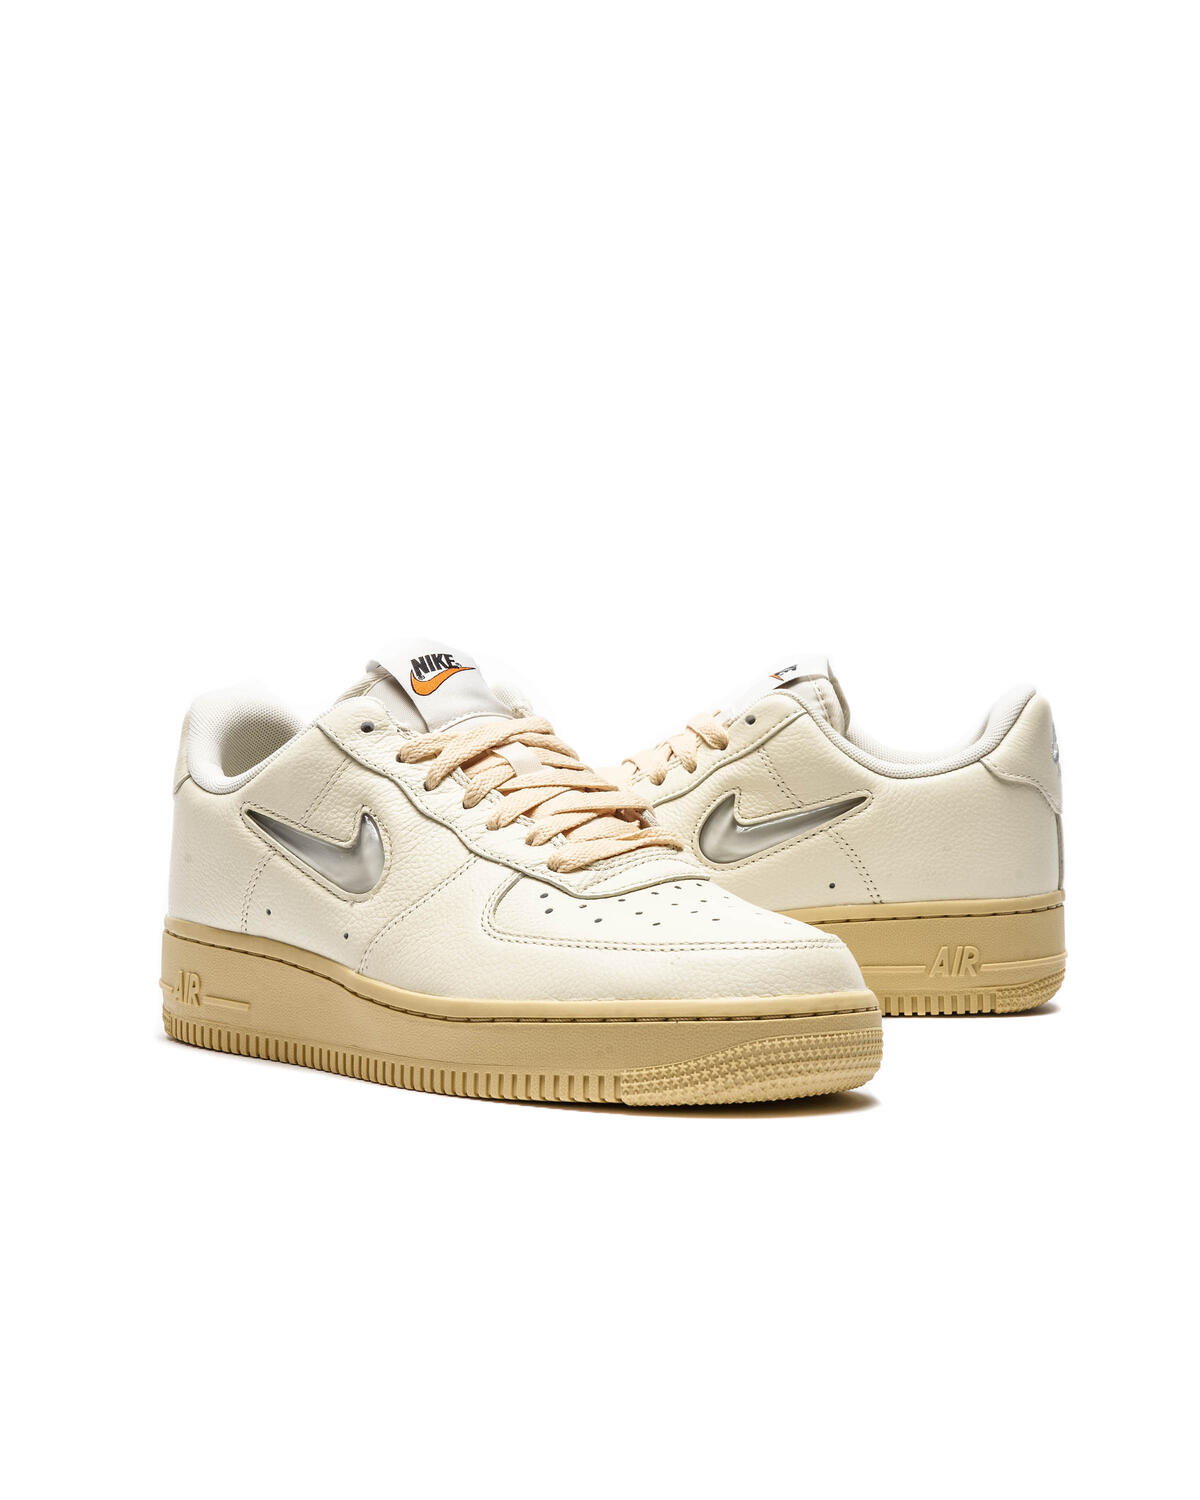 Nike WMNS AIR FORCE 1 '07 LX | DO9456-100 | AFEW STORE